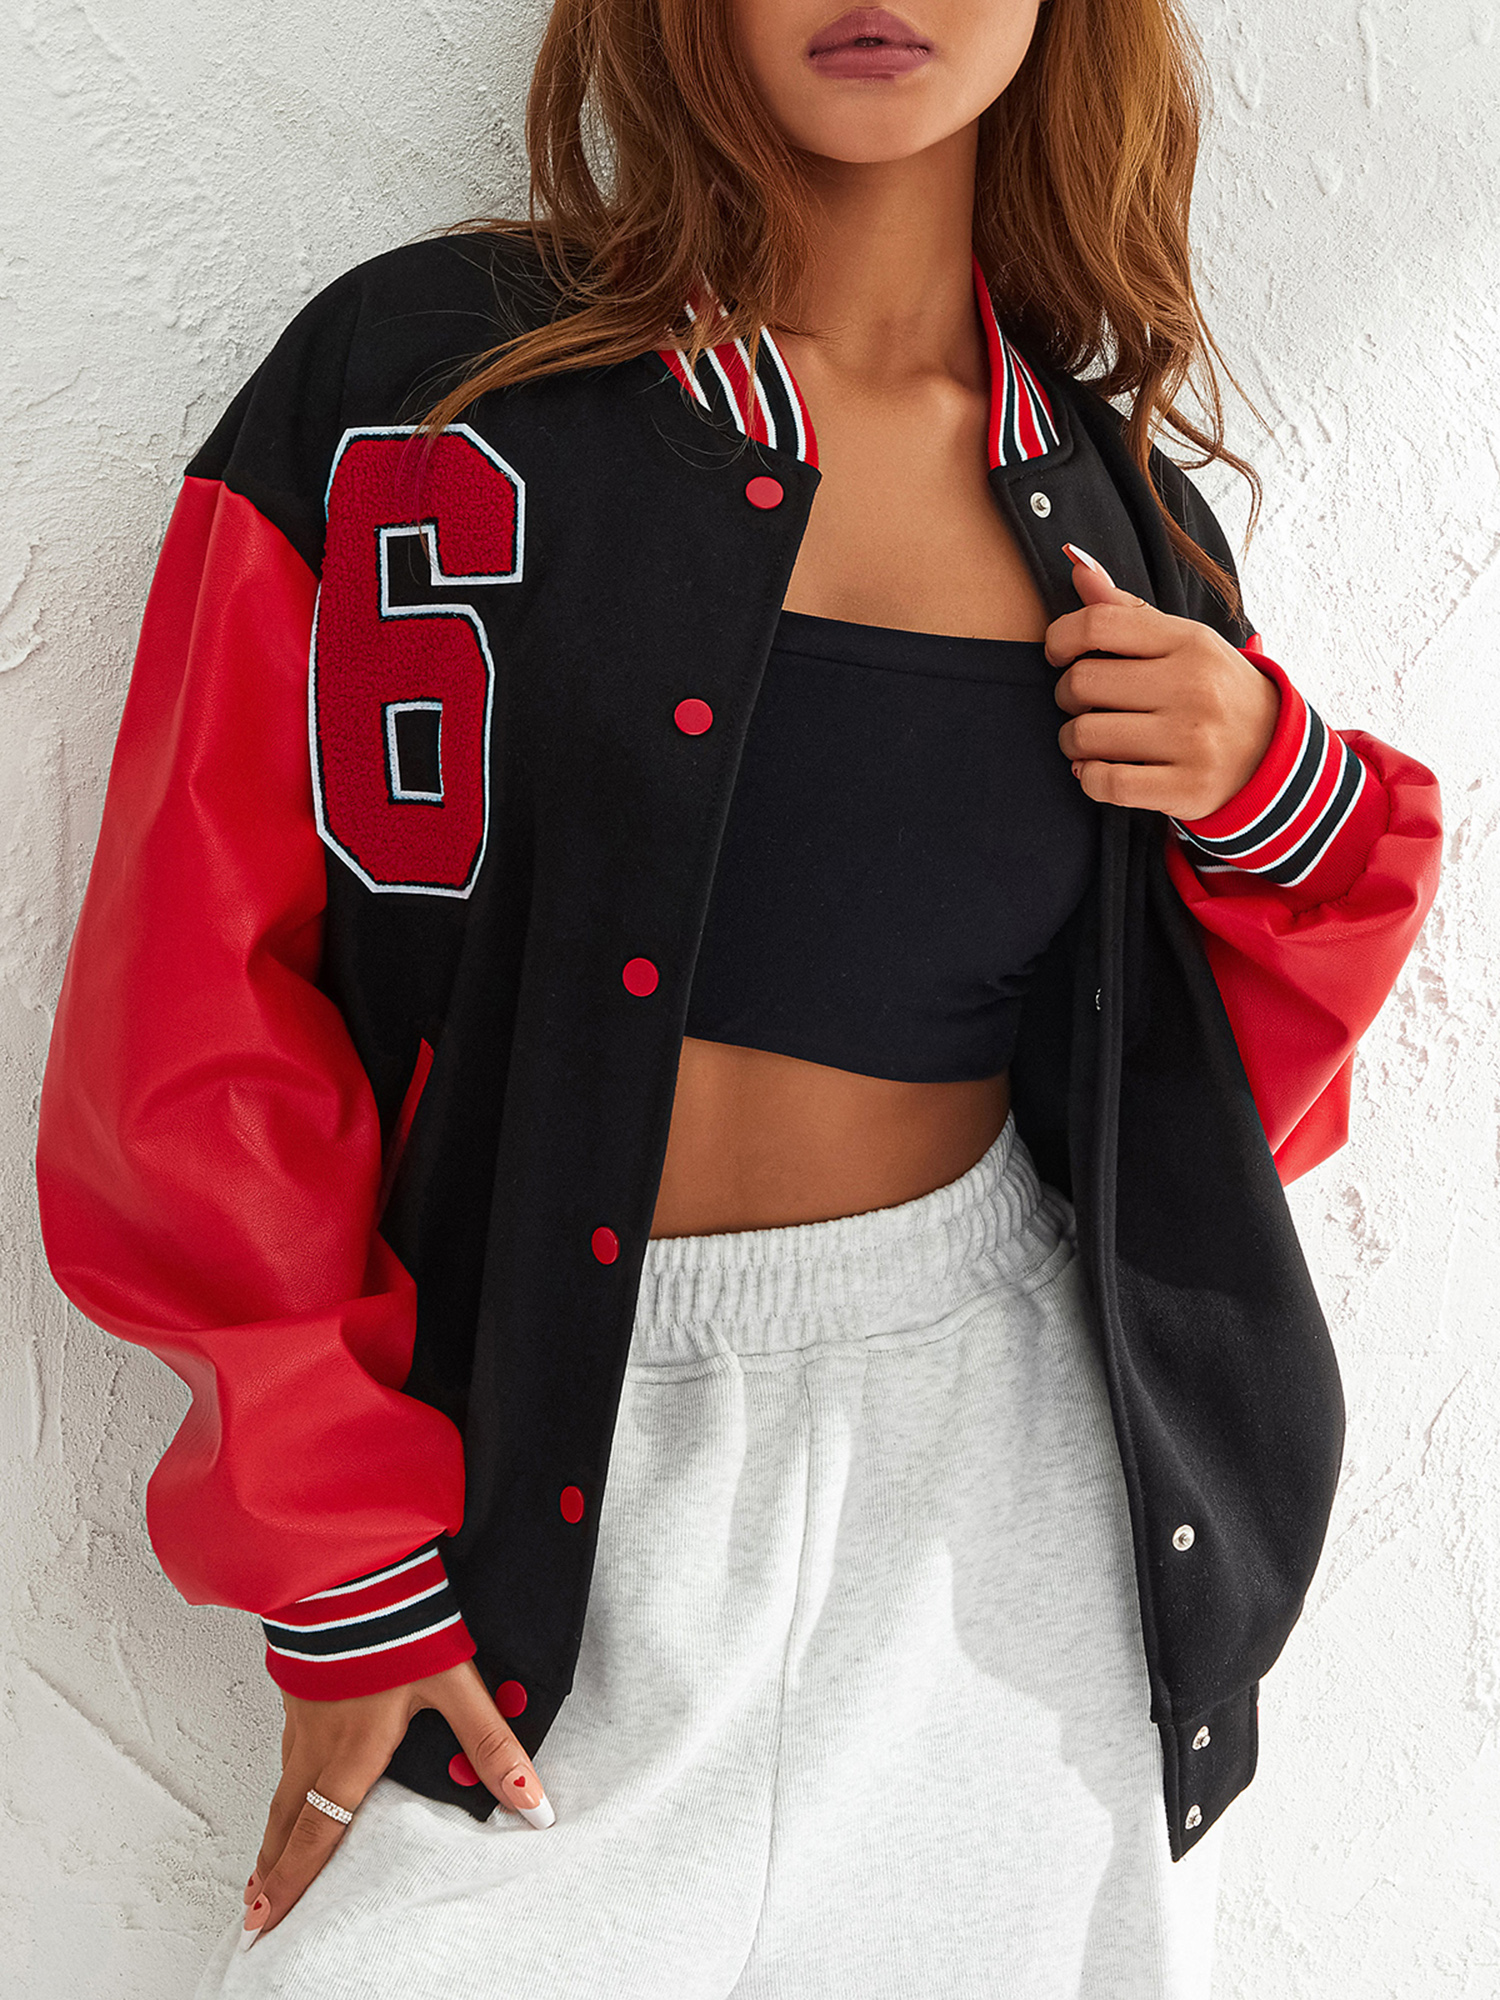 Liacowi Women Juniors Oversized Baseball Jacket Letters Print Button Bomber Jacket Long Sleeve Leather Parchwork Outwear Streetwear for Teen - image 3 of 9